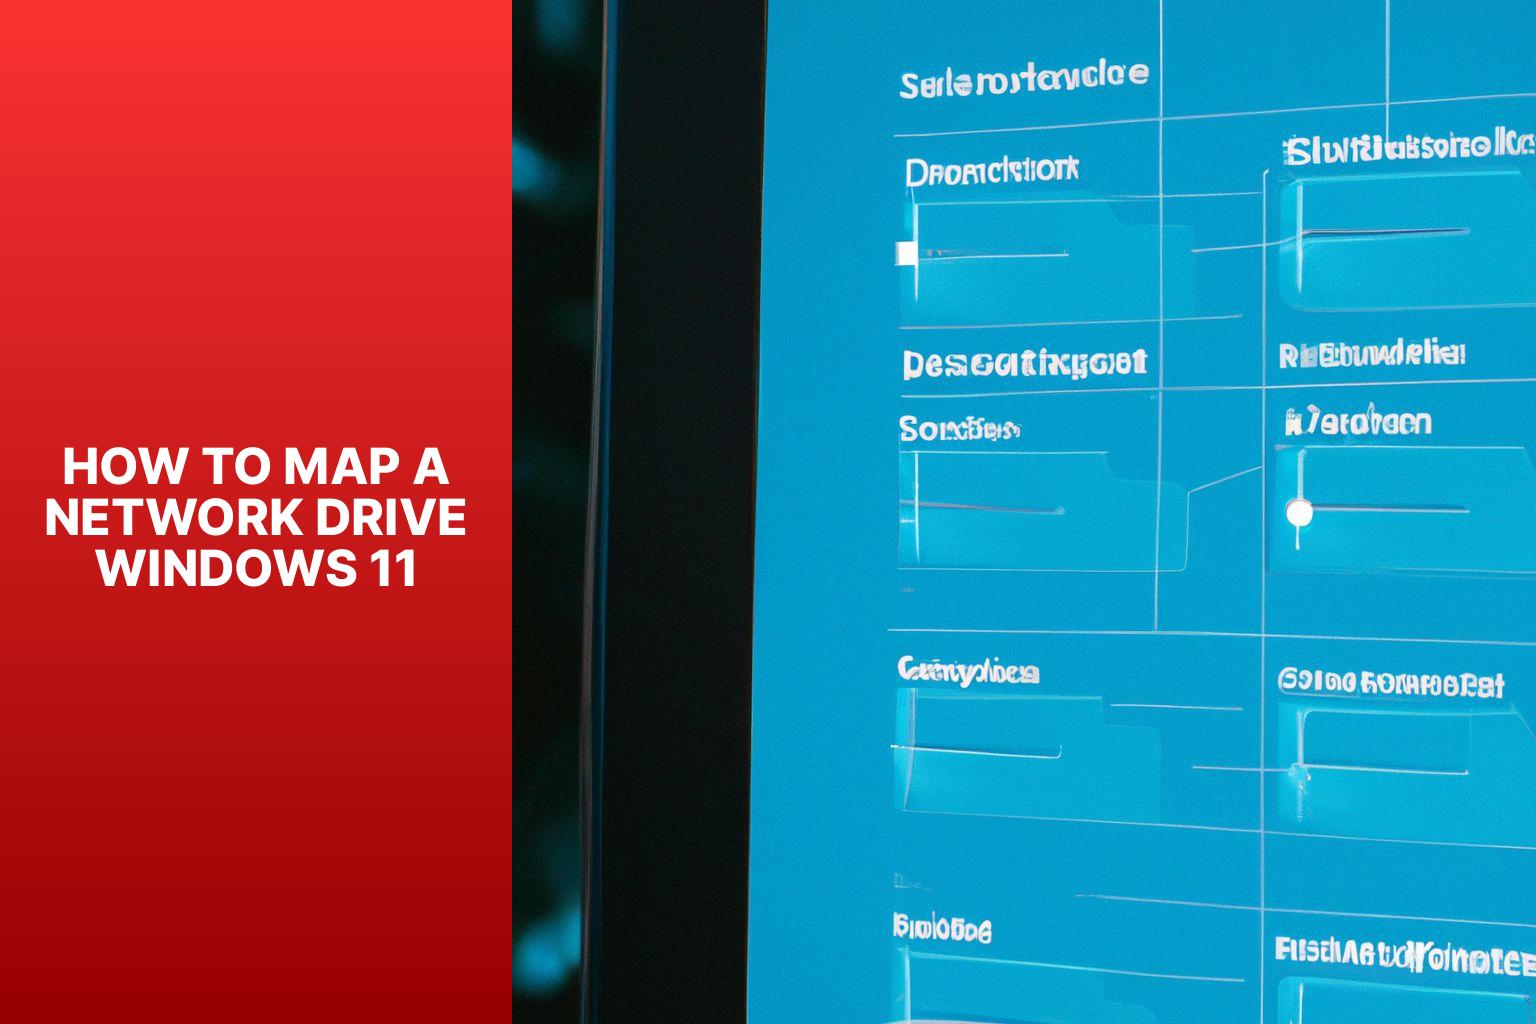 Easy Guide: How to Map a Network Drive on Win 11 – Step-by-Step Instructions